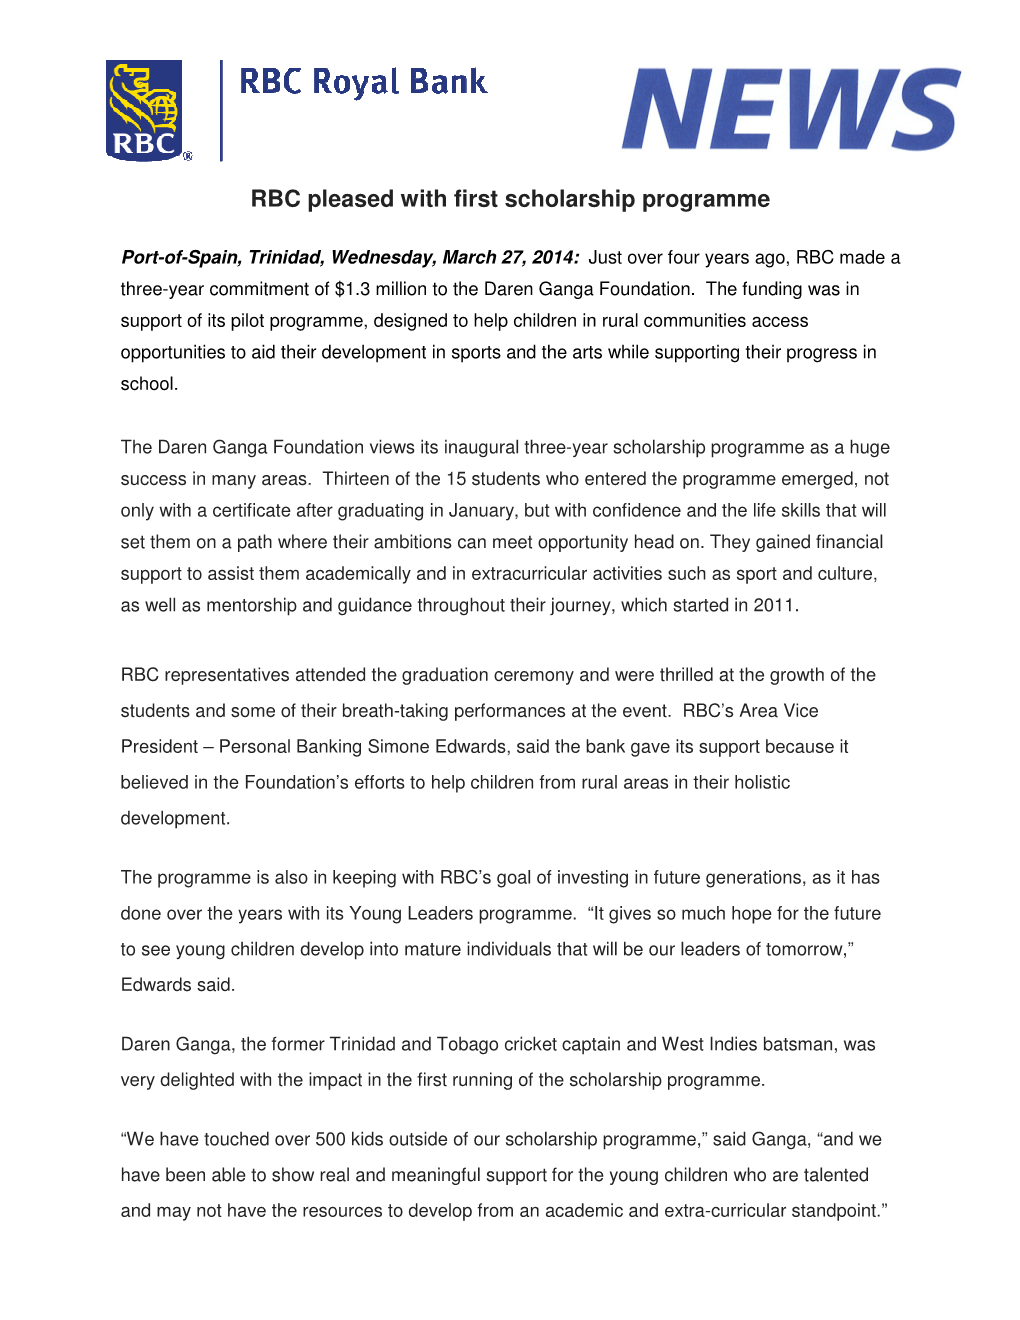 RBC Pleased with First Scholarship Programme